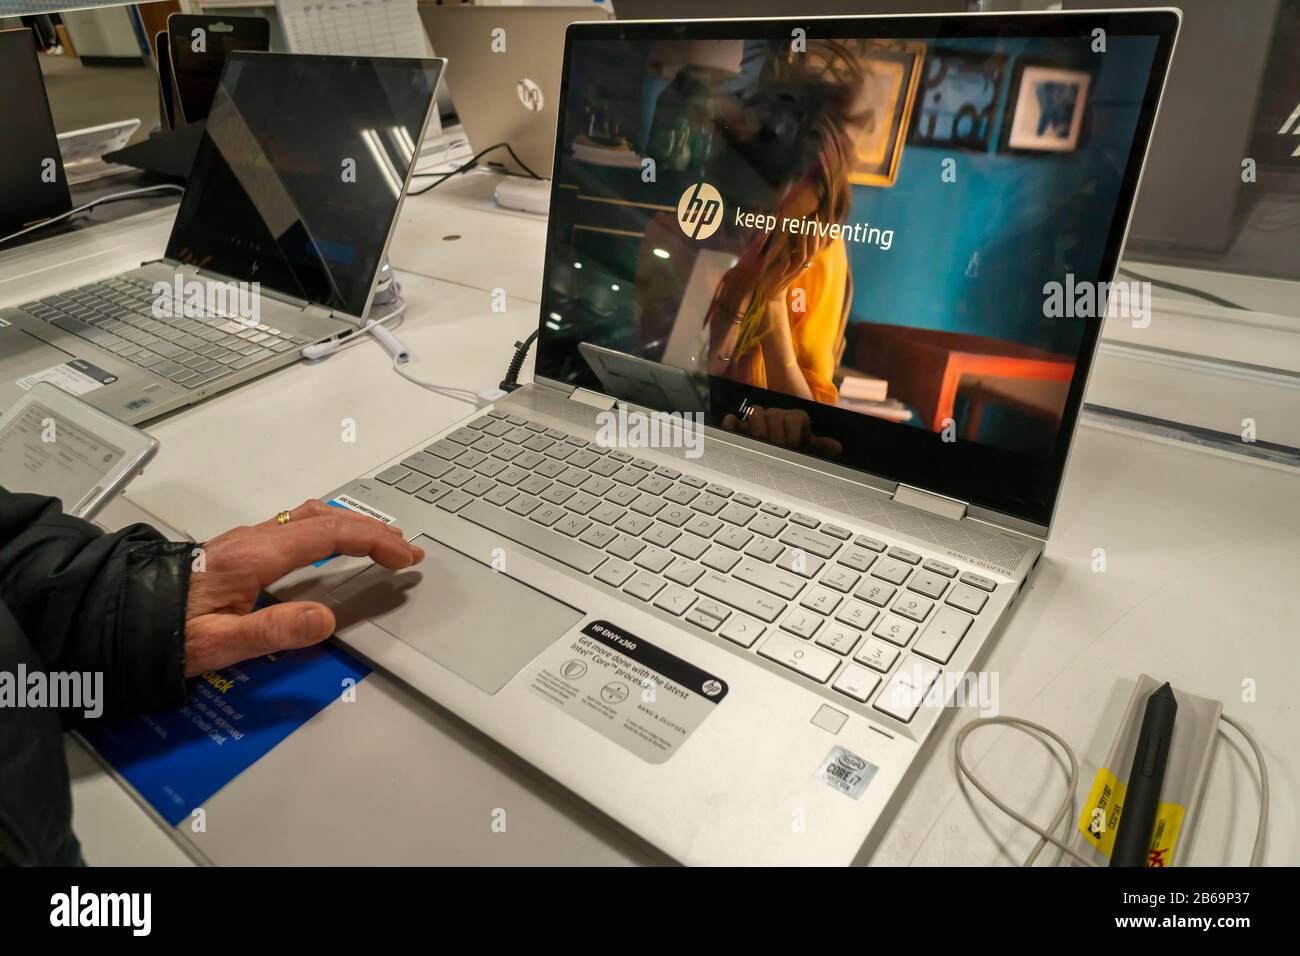 HP brand laptops in a Best Buy store in New York on Tuesday, March 3, 2020.